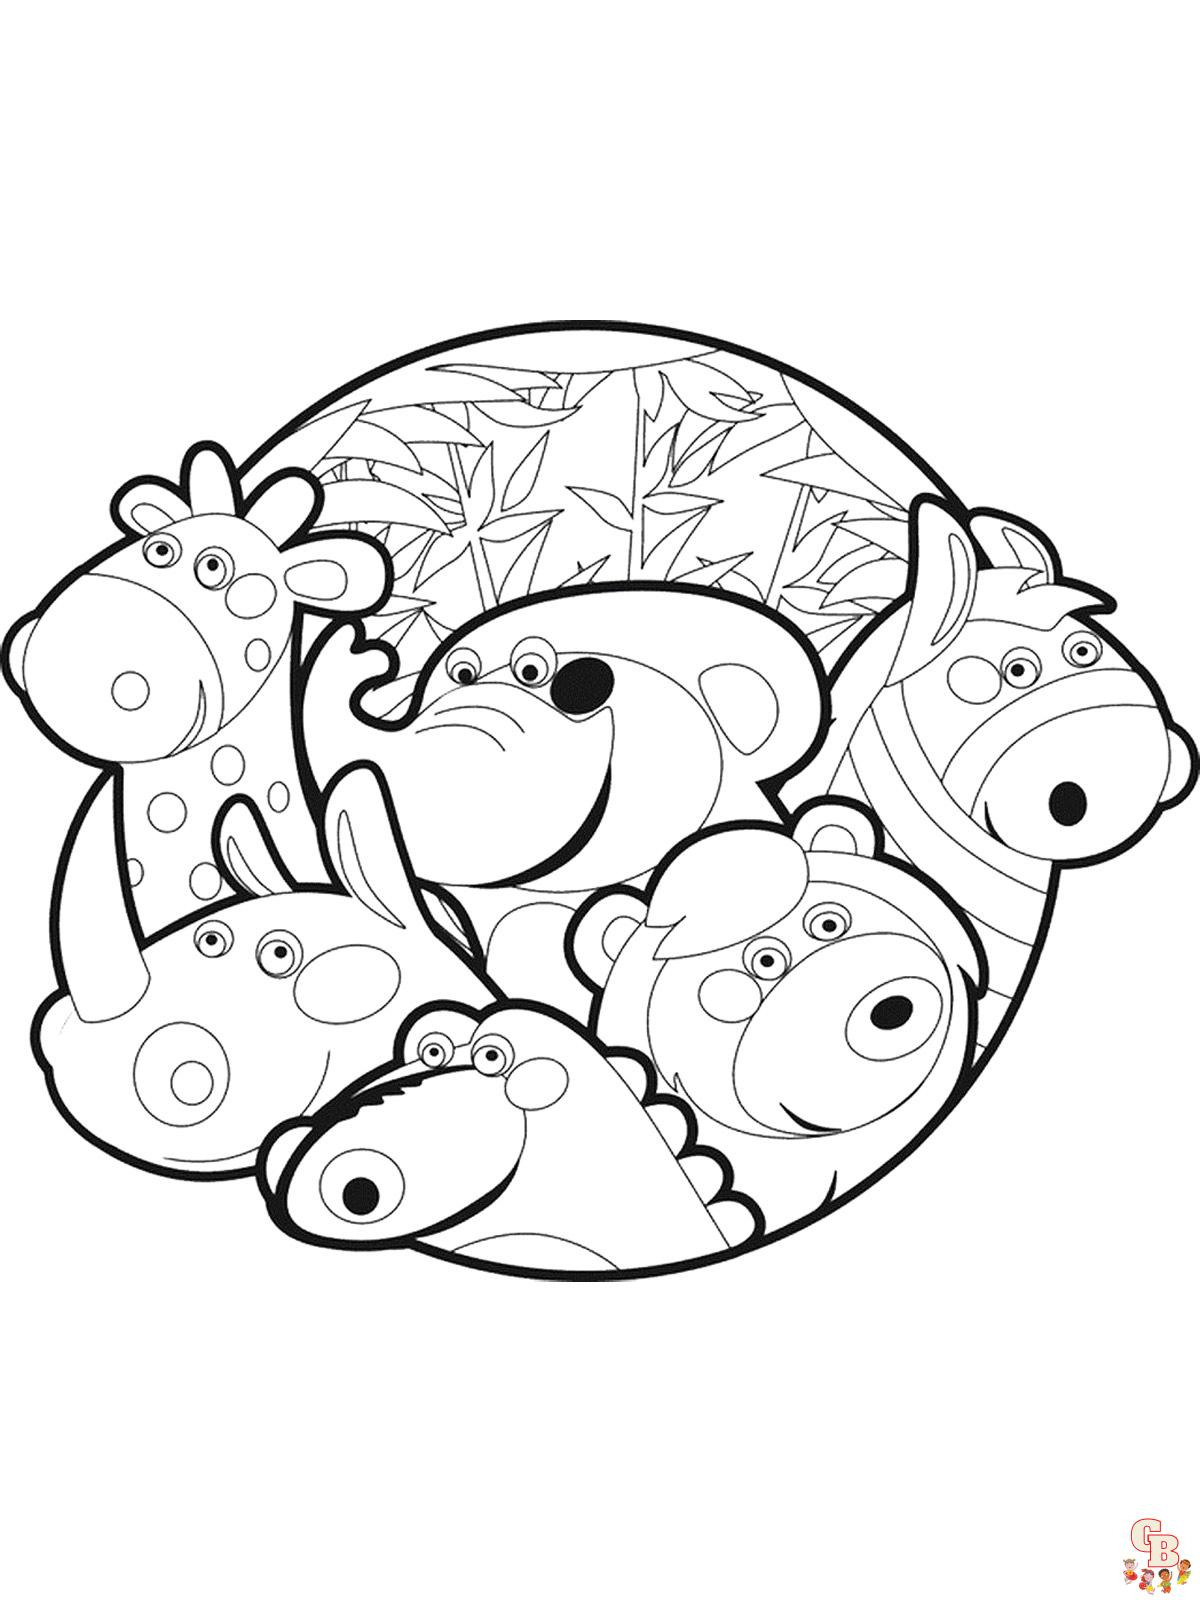 Zoo Coloring Pages 7